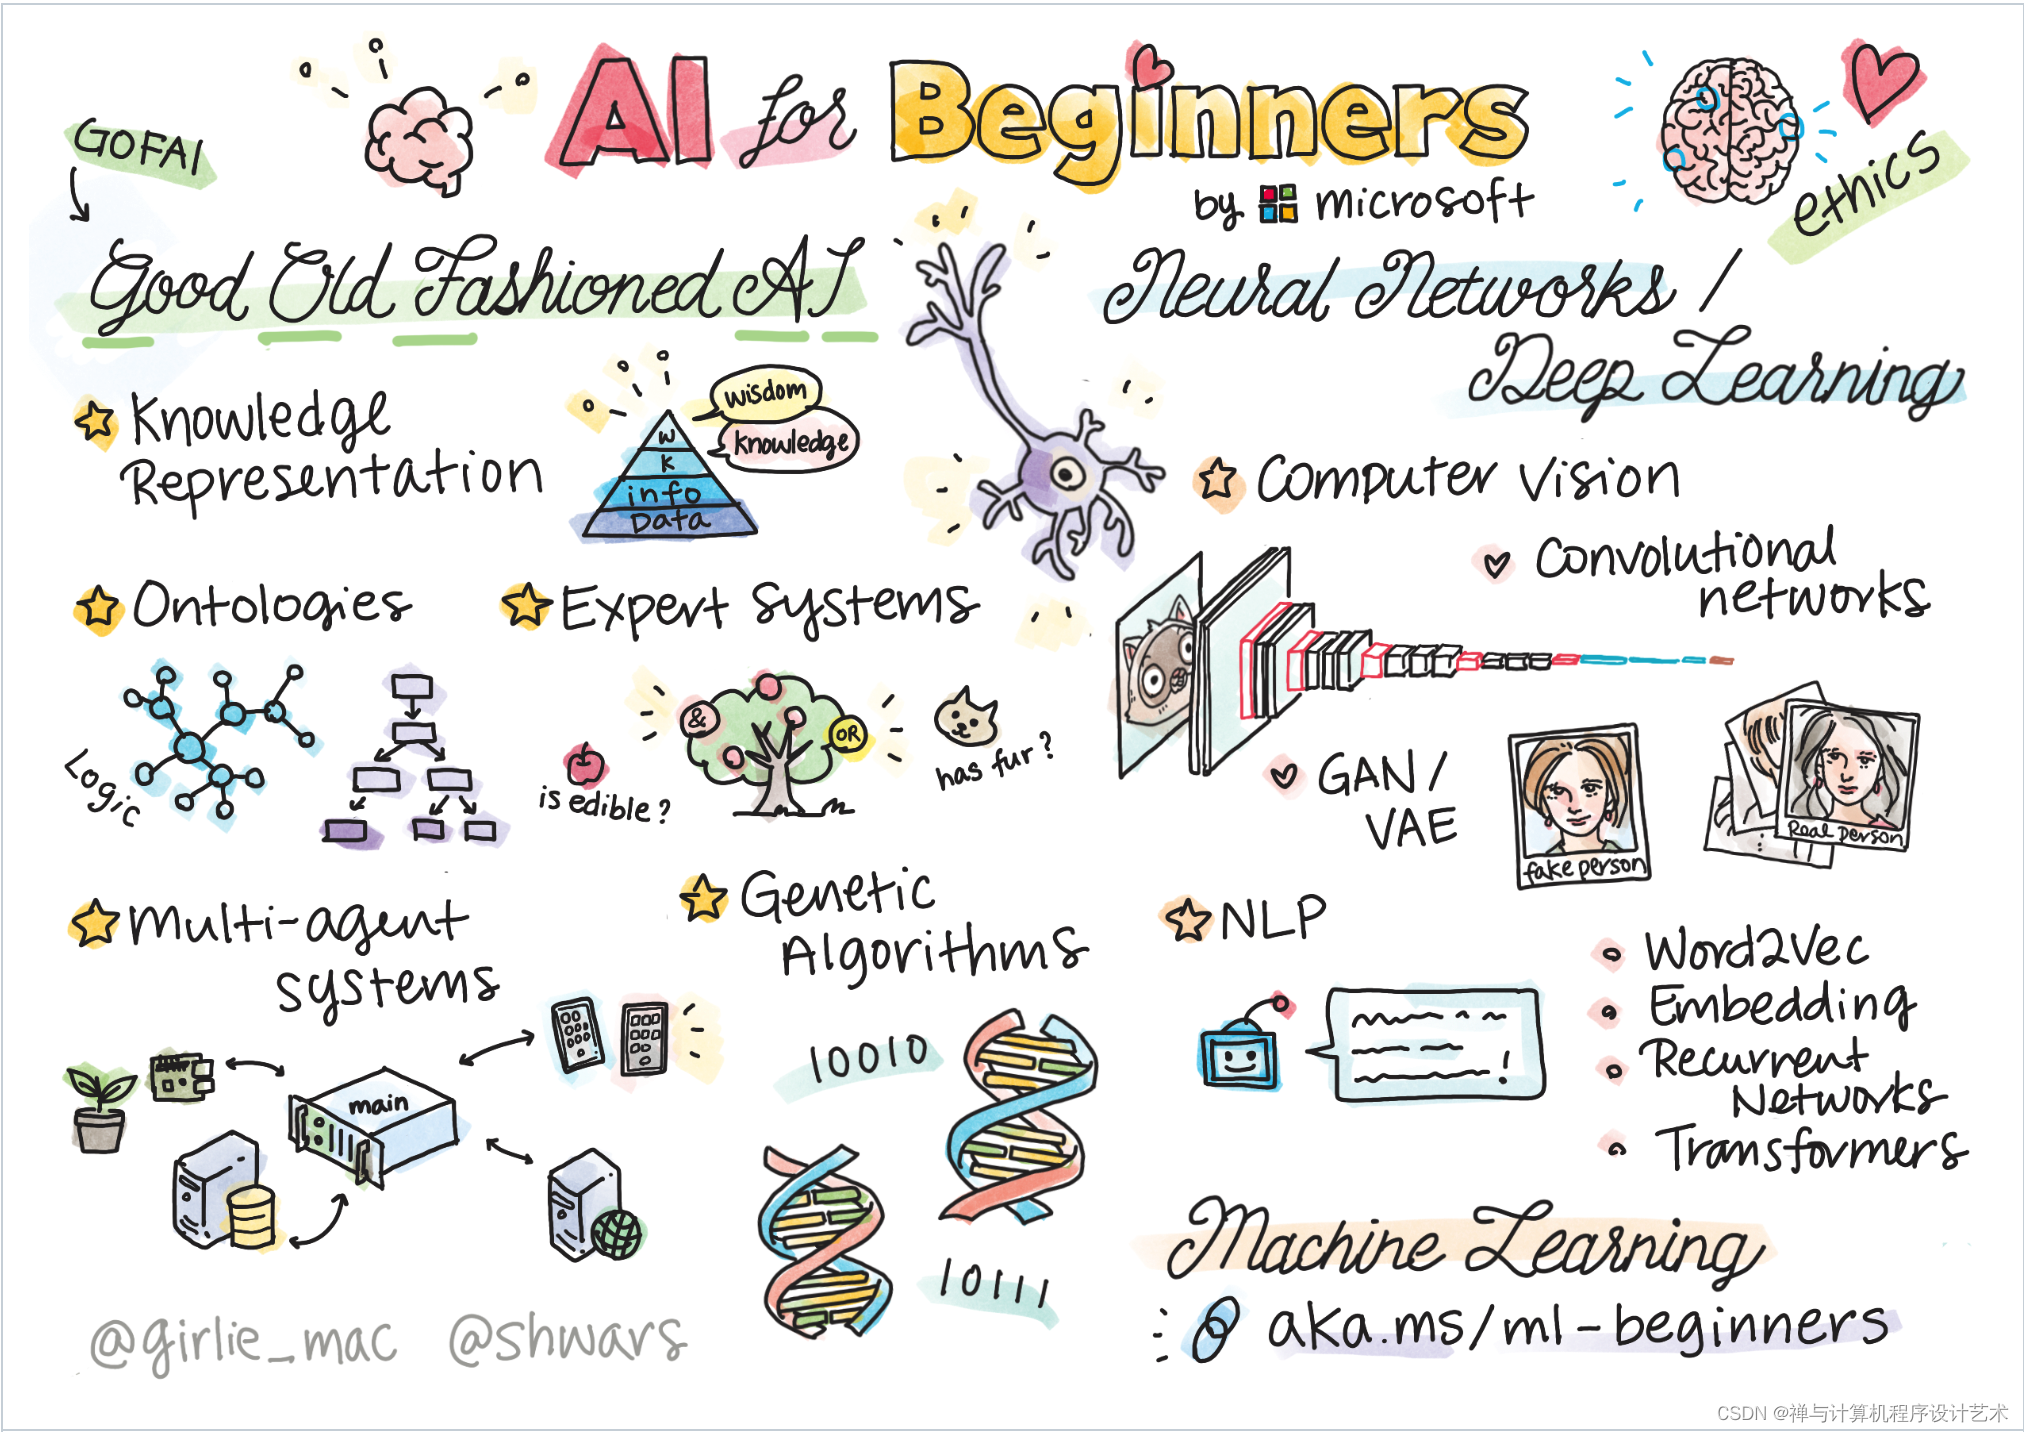 【AI人工智能】Artificial Intelligence for Beginners - A Curriculum